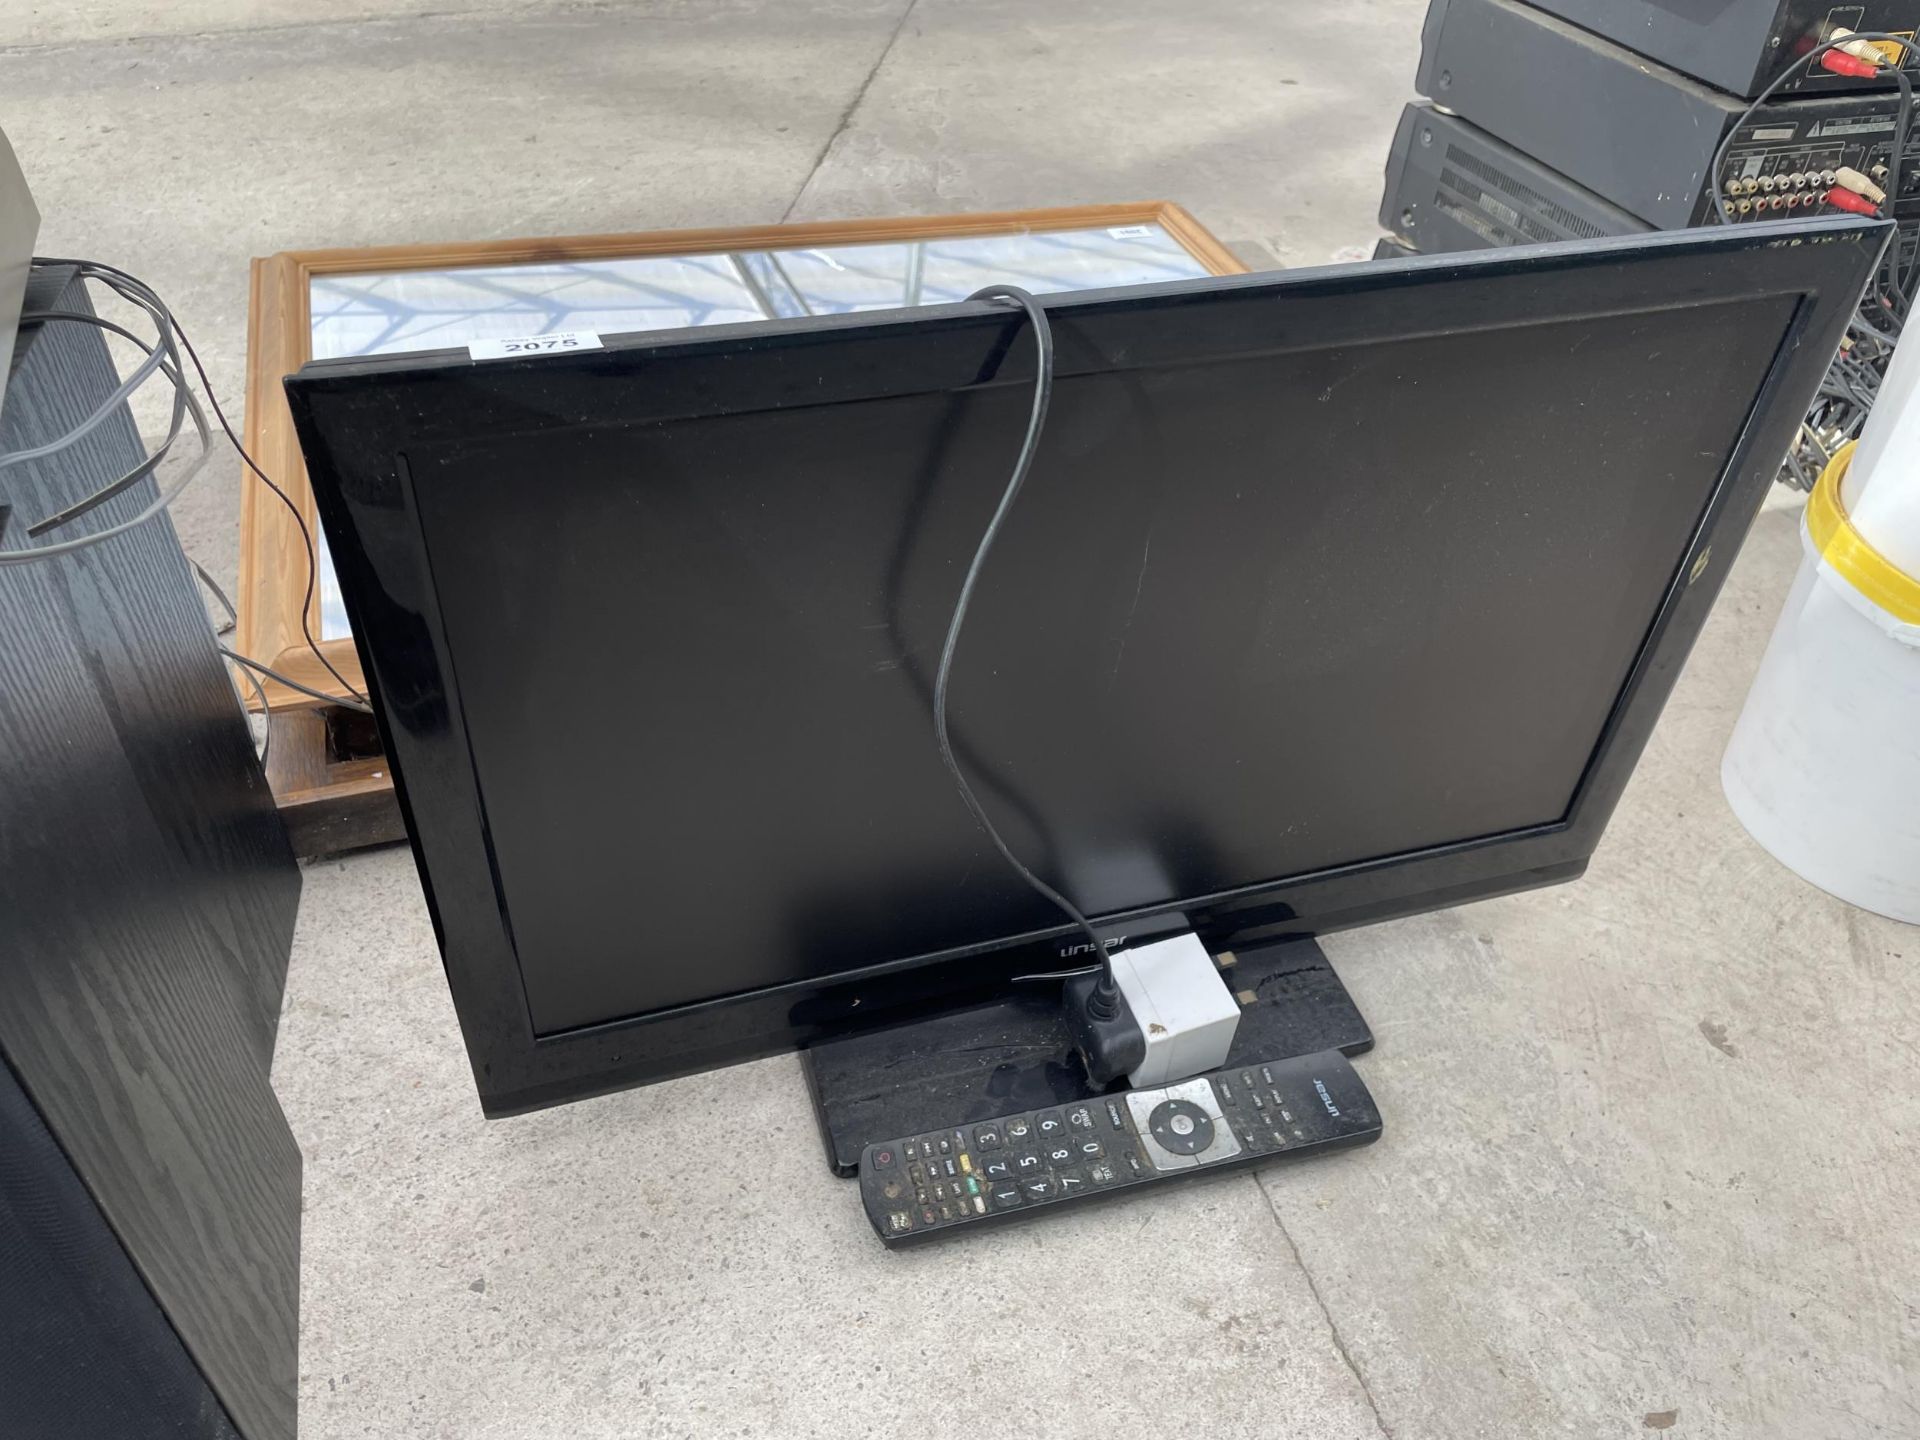 A LINSAR 24" TELEVISION WITH REMOTE CONTROL